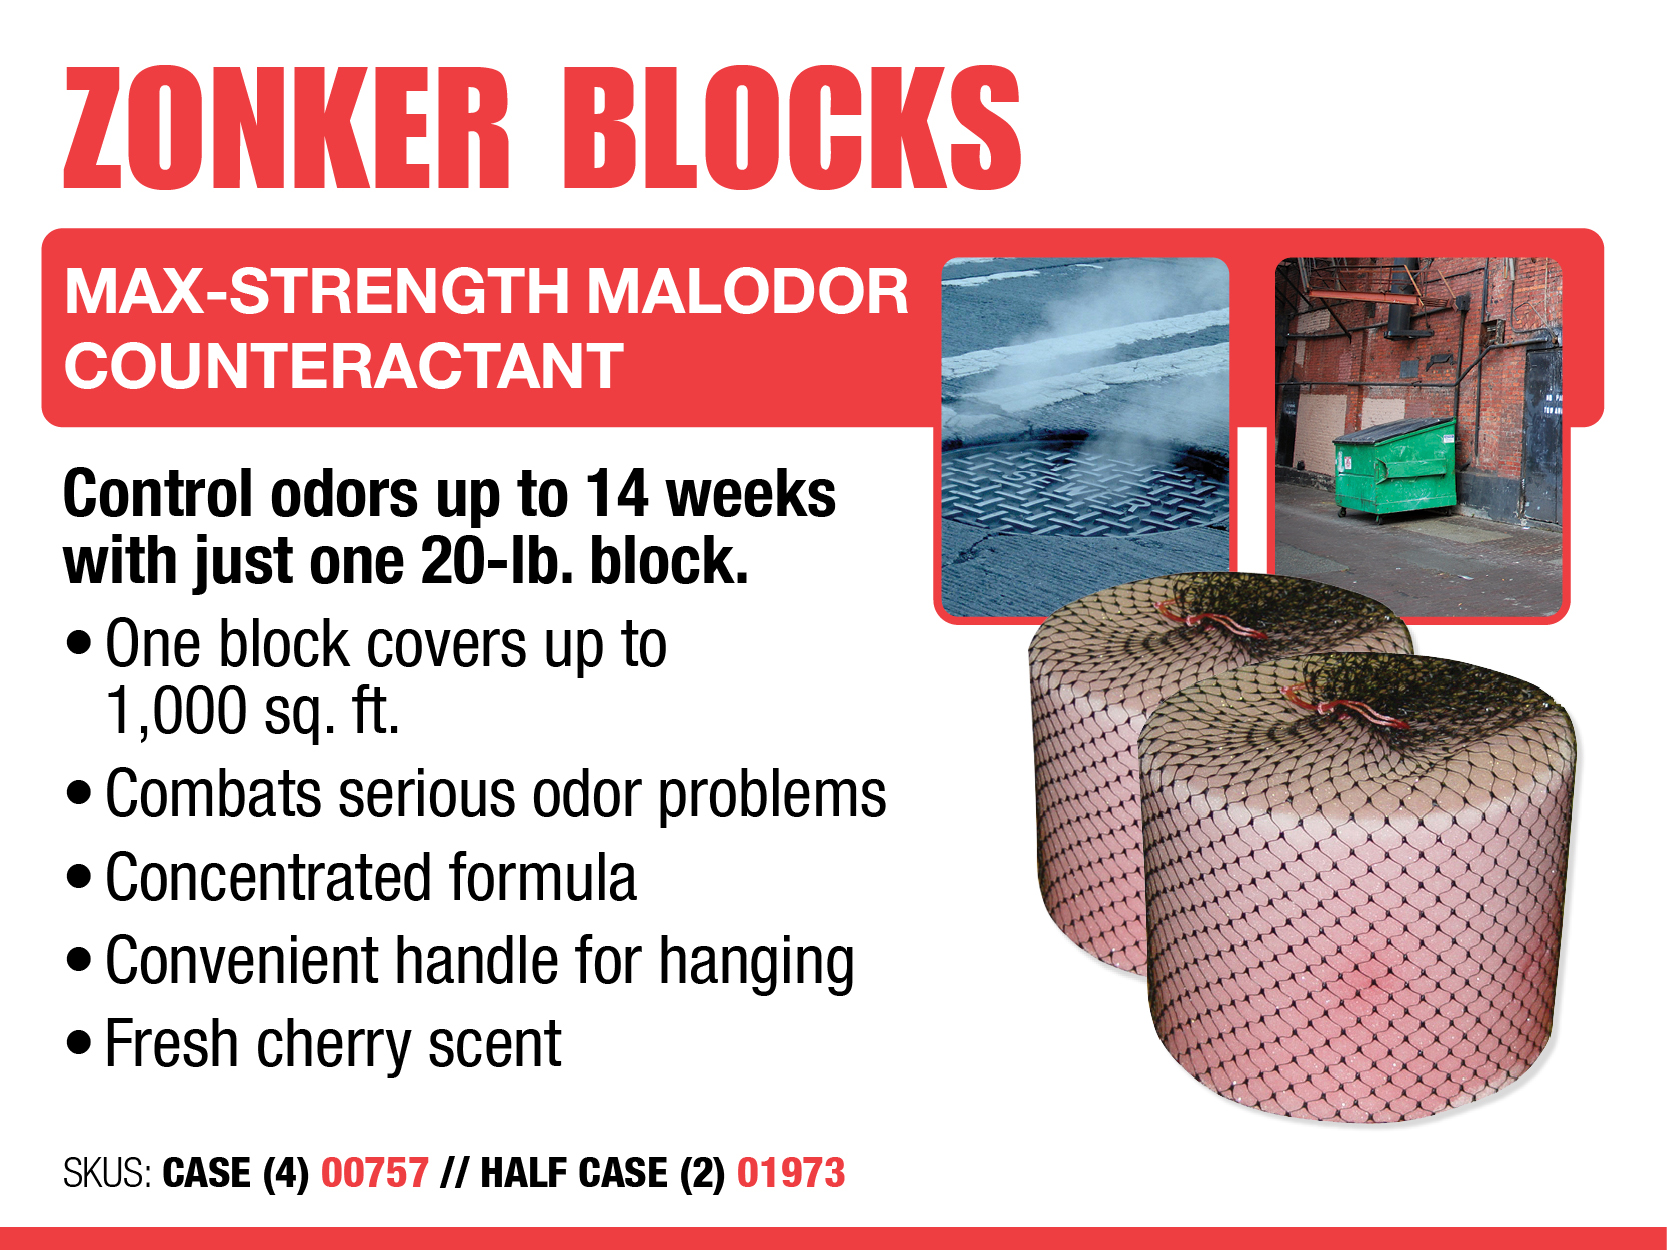 Zonker Blocks - Max-Strength Malodor Counteractant - Wastewater Essentials  - Collections, Plants, and Lagoons - Wastewater Treatment